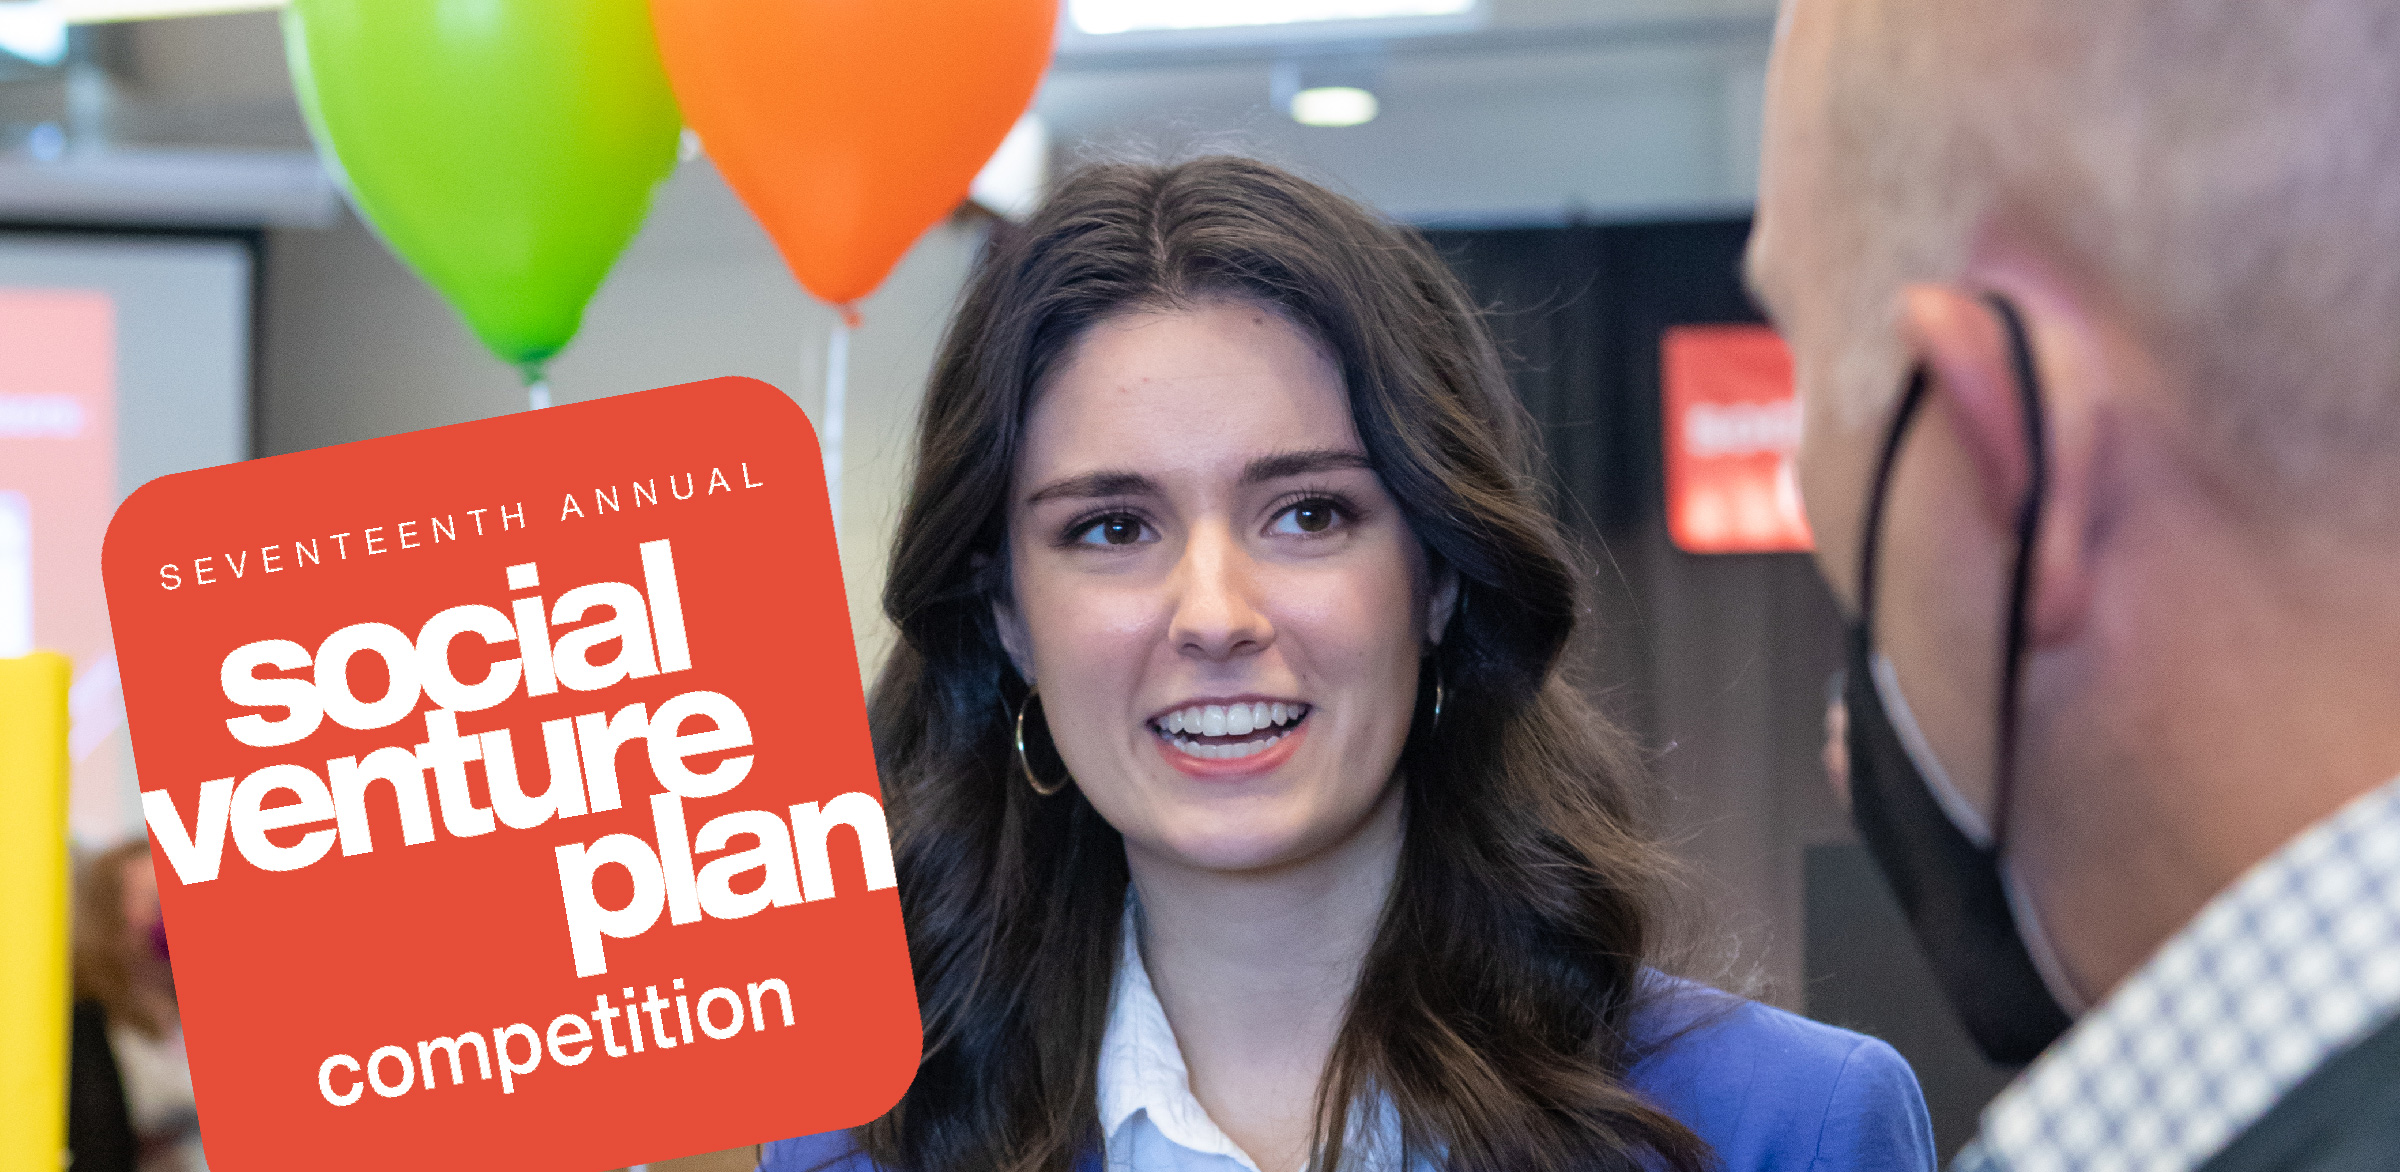 Seventeenth Annual Social Venture Plan Competition